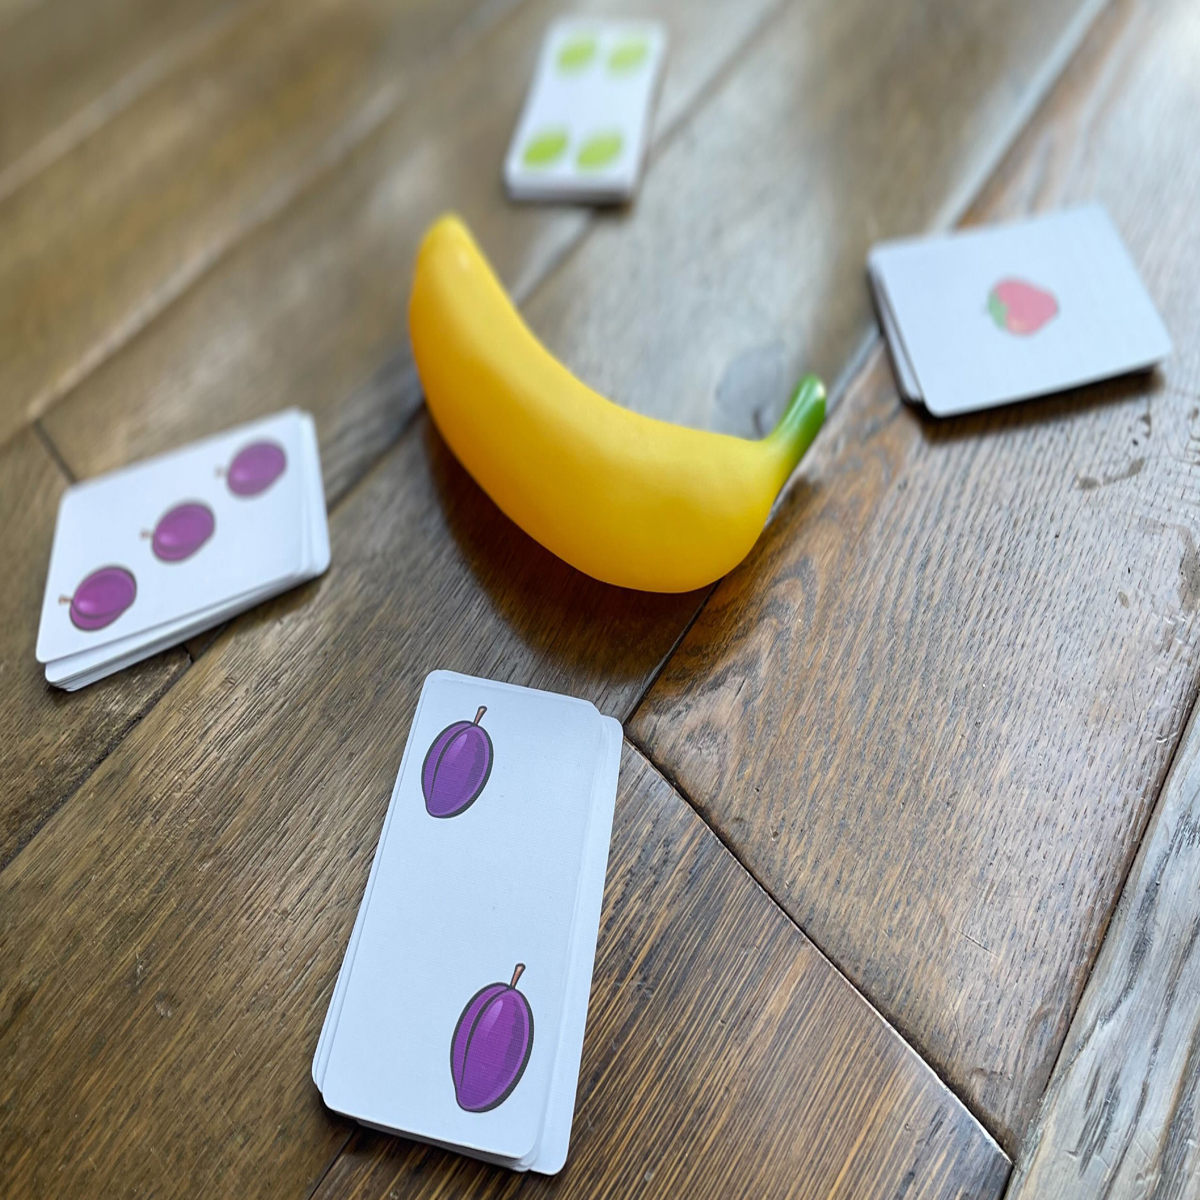 This video game is controlled by bananas